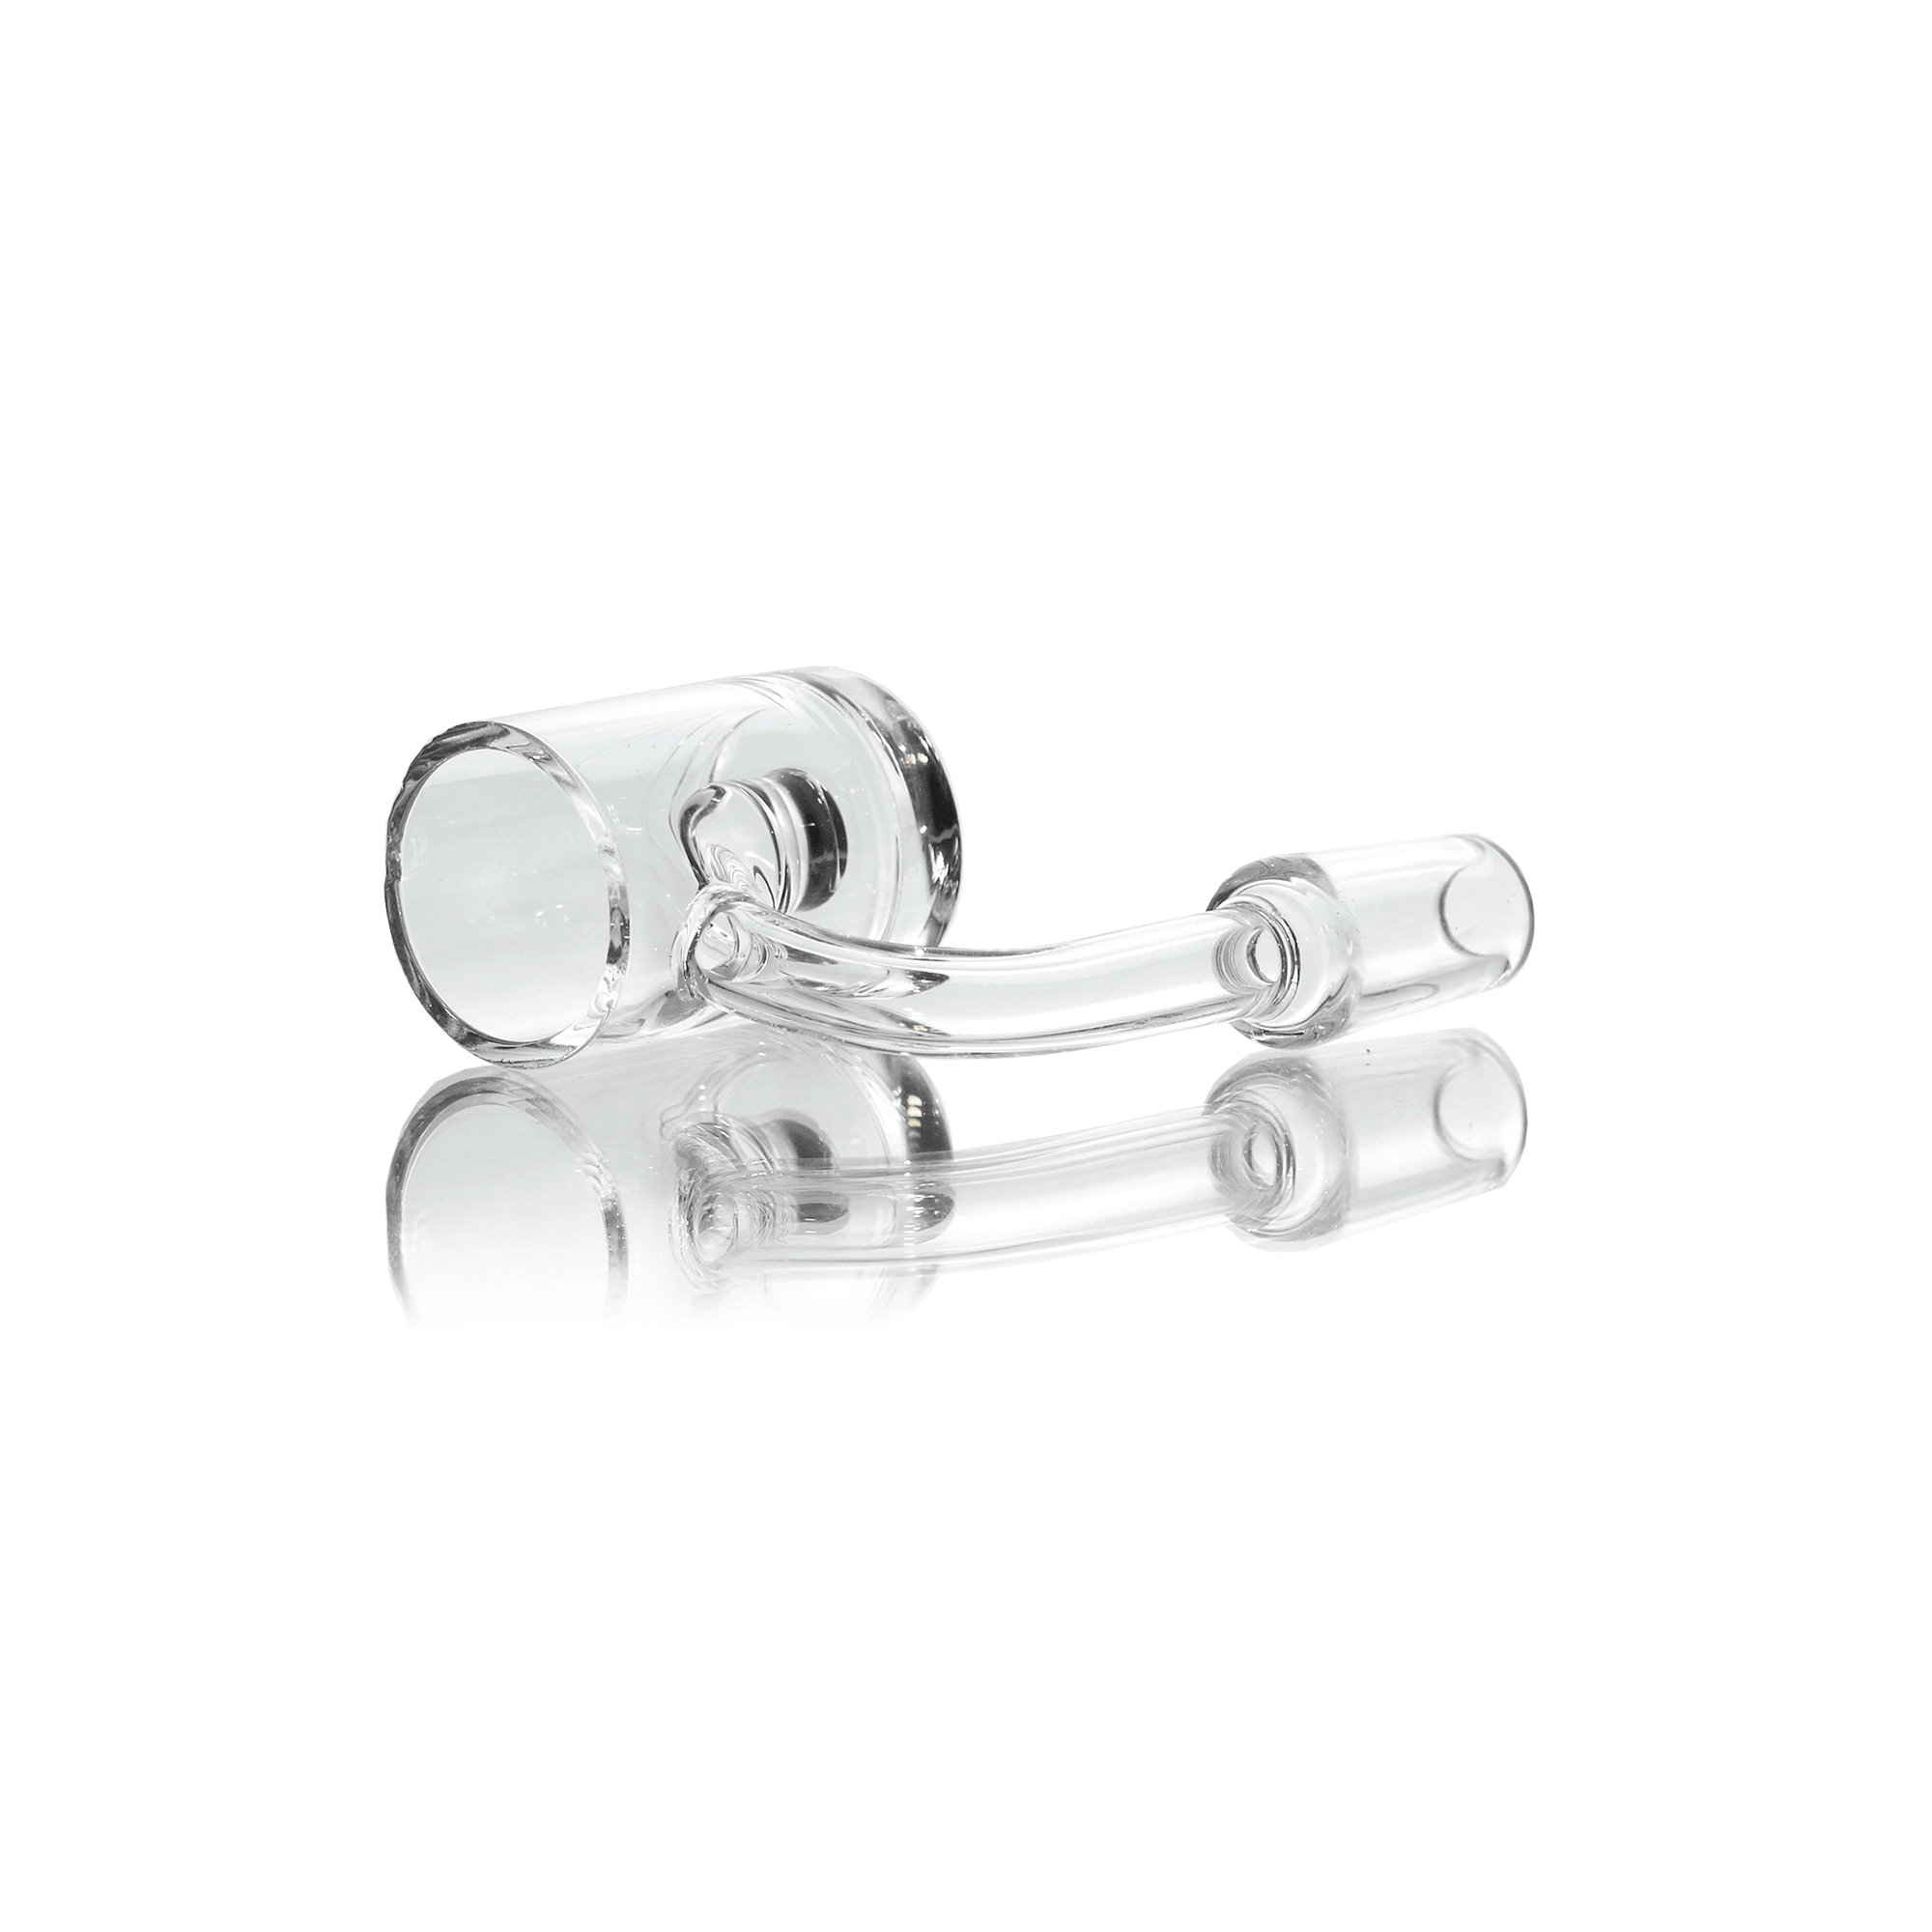 Quartz Banger Core Reactor 14mm Male With Saucer Cap | Angled Banger View | Dabbing Warehouse